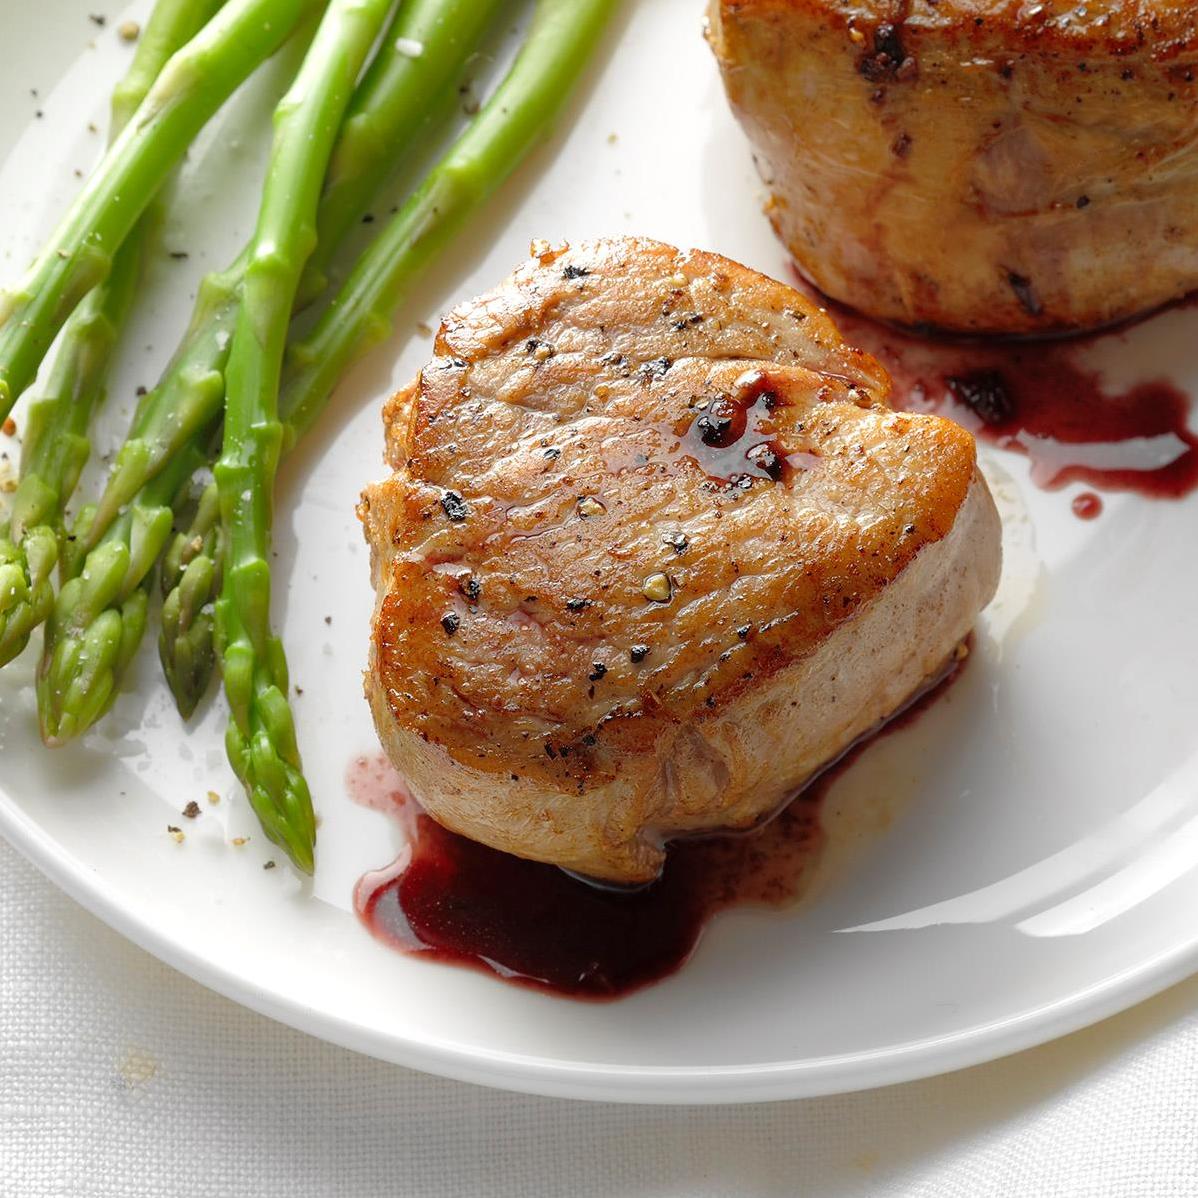  The amazing aroma of red wine complements the tender pork meat perfectly.